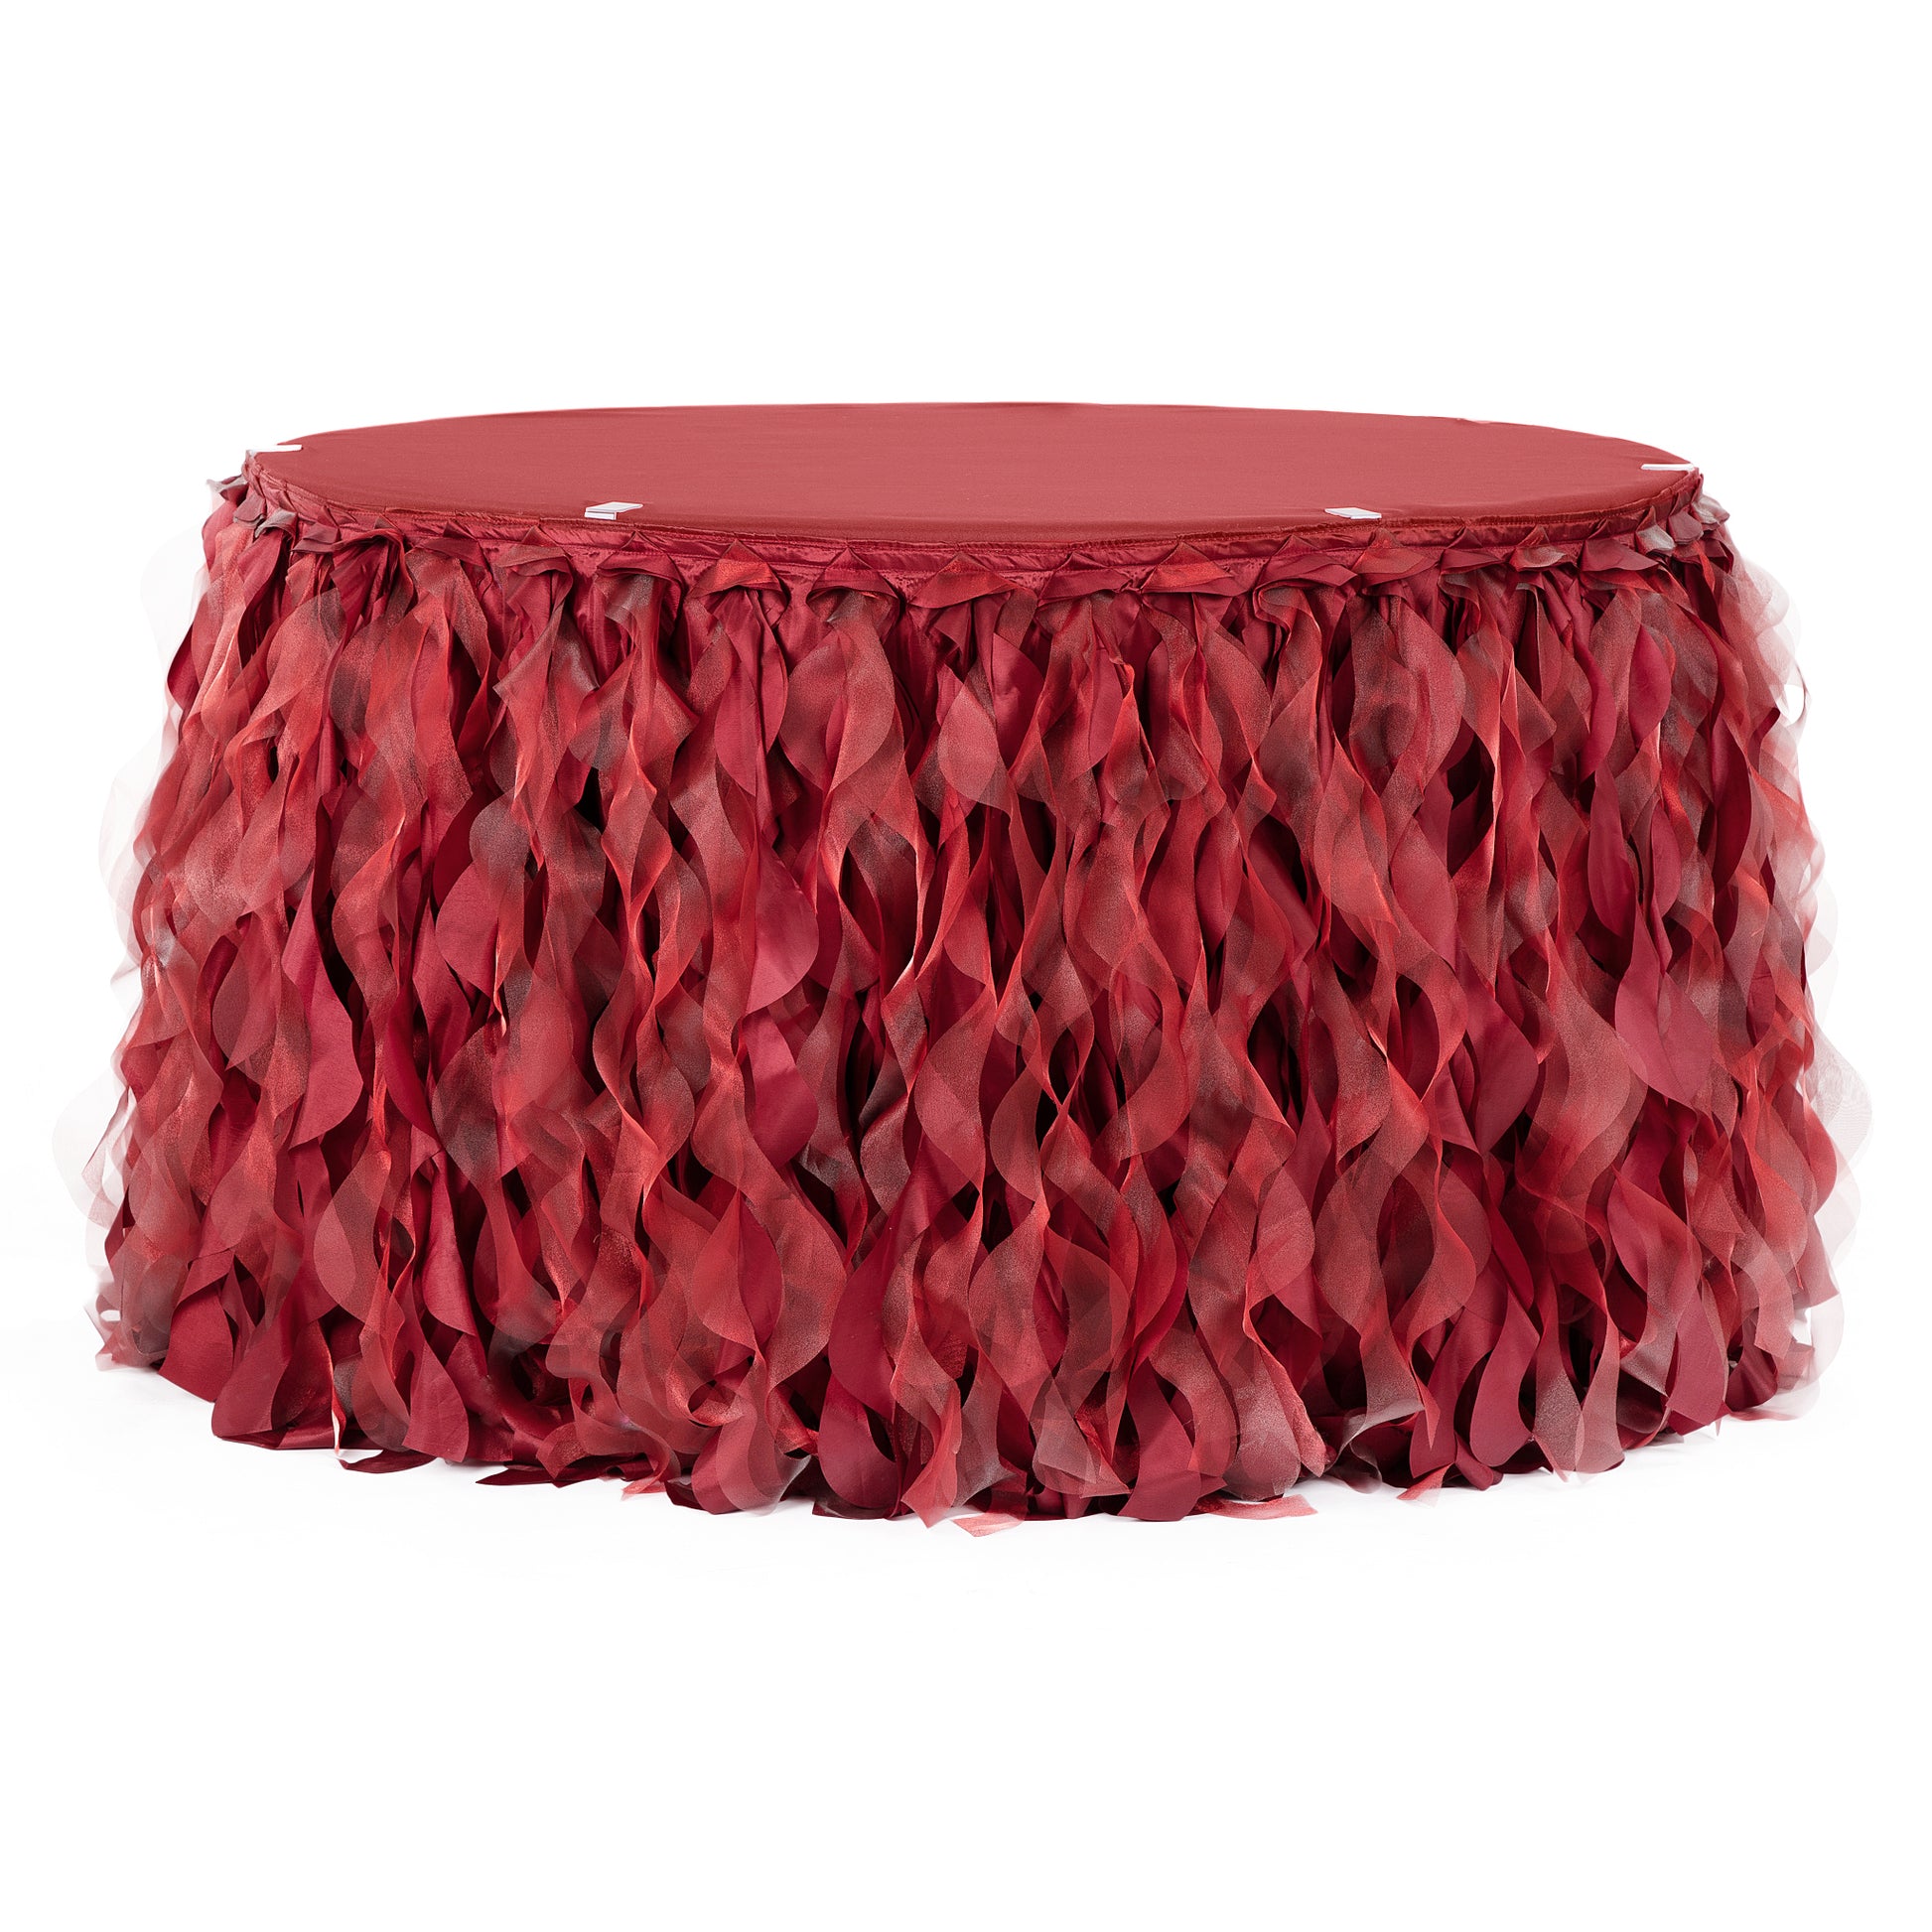 Curly Willow 17ft Table Skirt - Apple Red - CV Linens